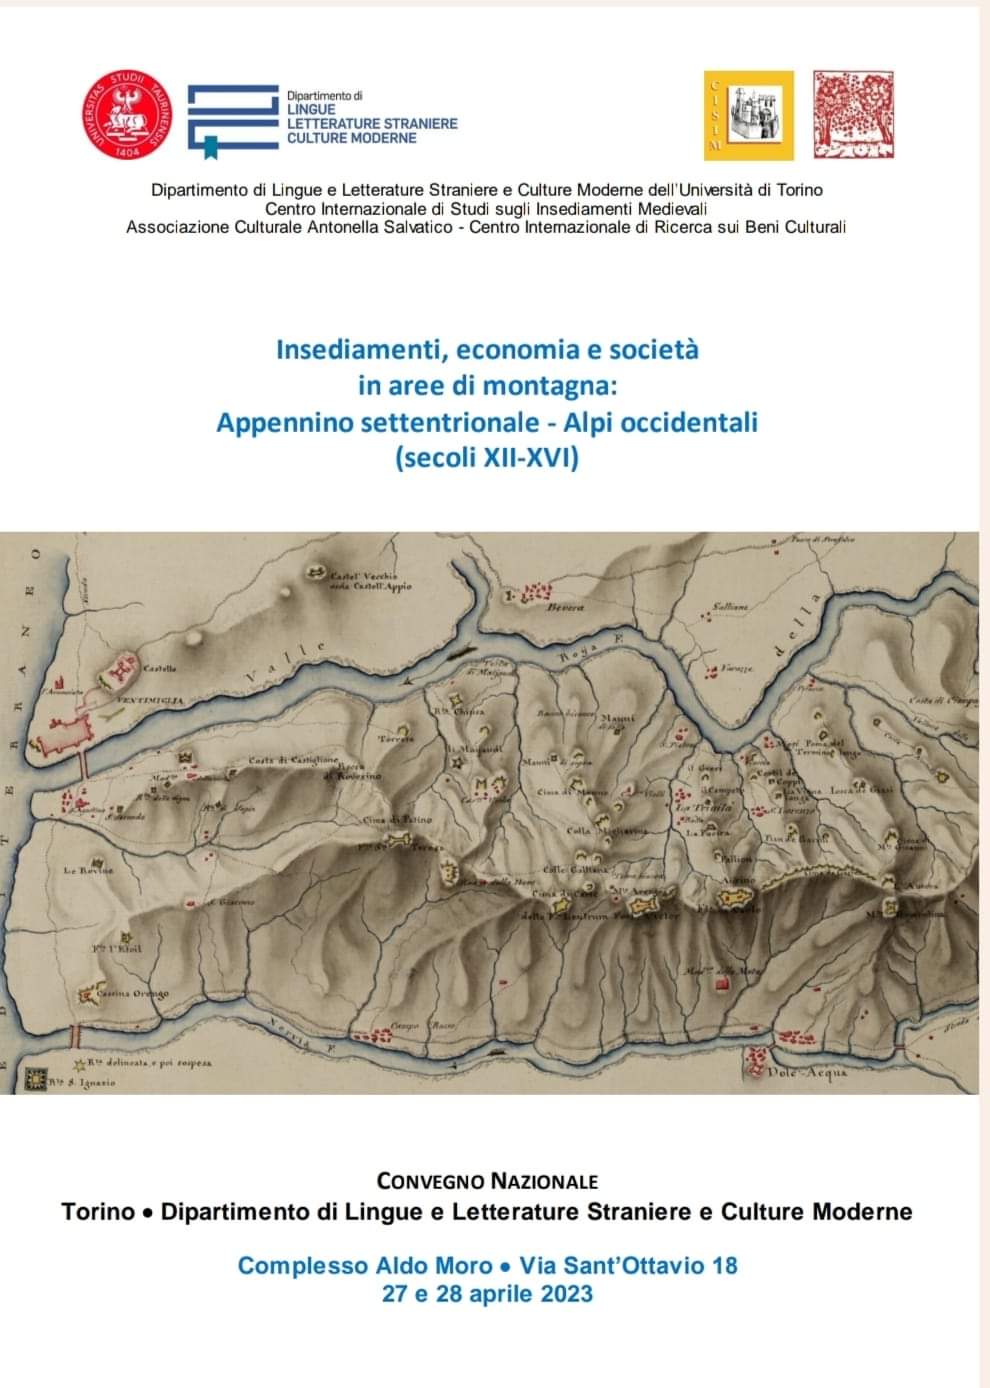 Upcoming Conference: Settlements, economy and society in mountain areas: Northern Apennines - Western Alps (12th-16th centuries)